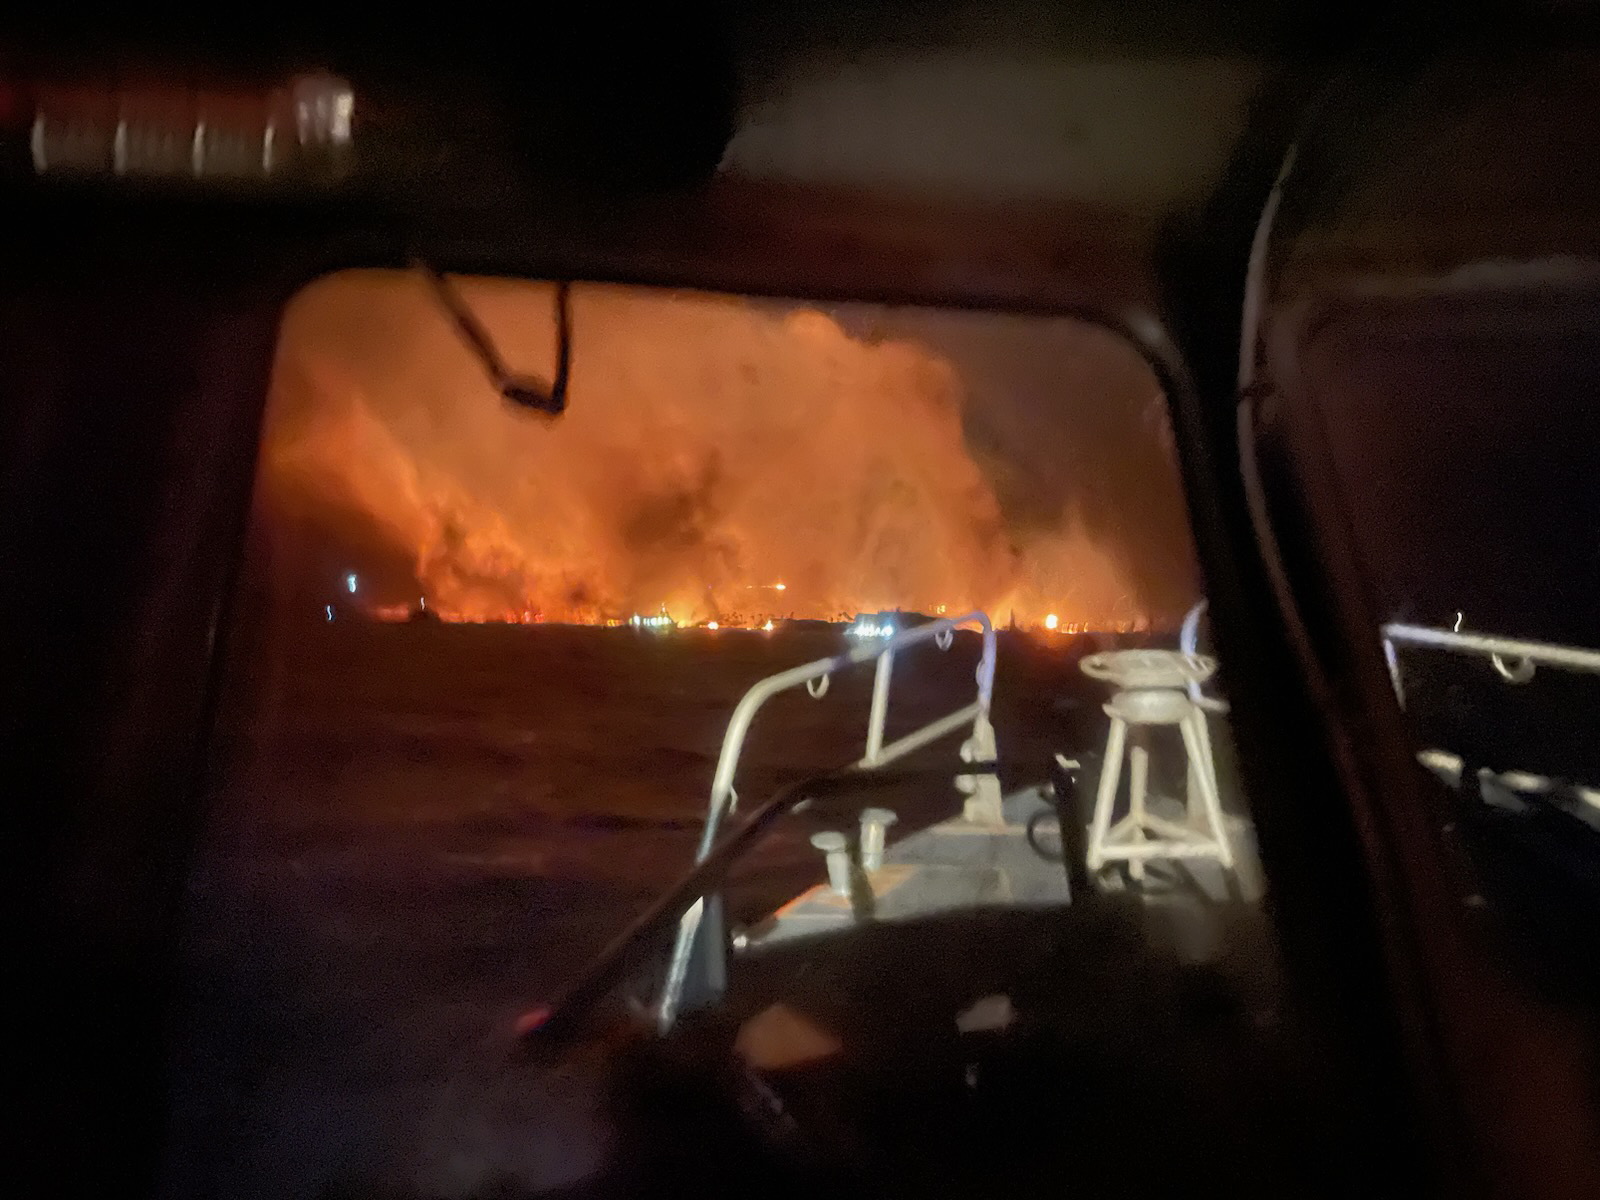 US Coast Guard crews respond from the ocean to the Lahaina wildfires in Maui, Hawaii